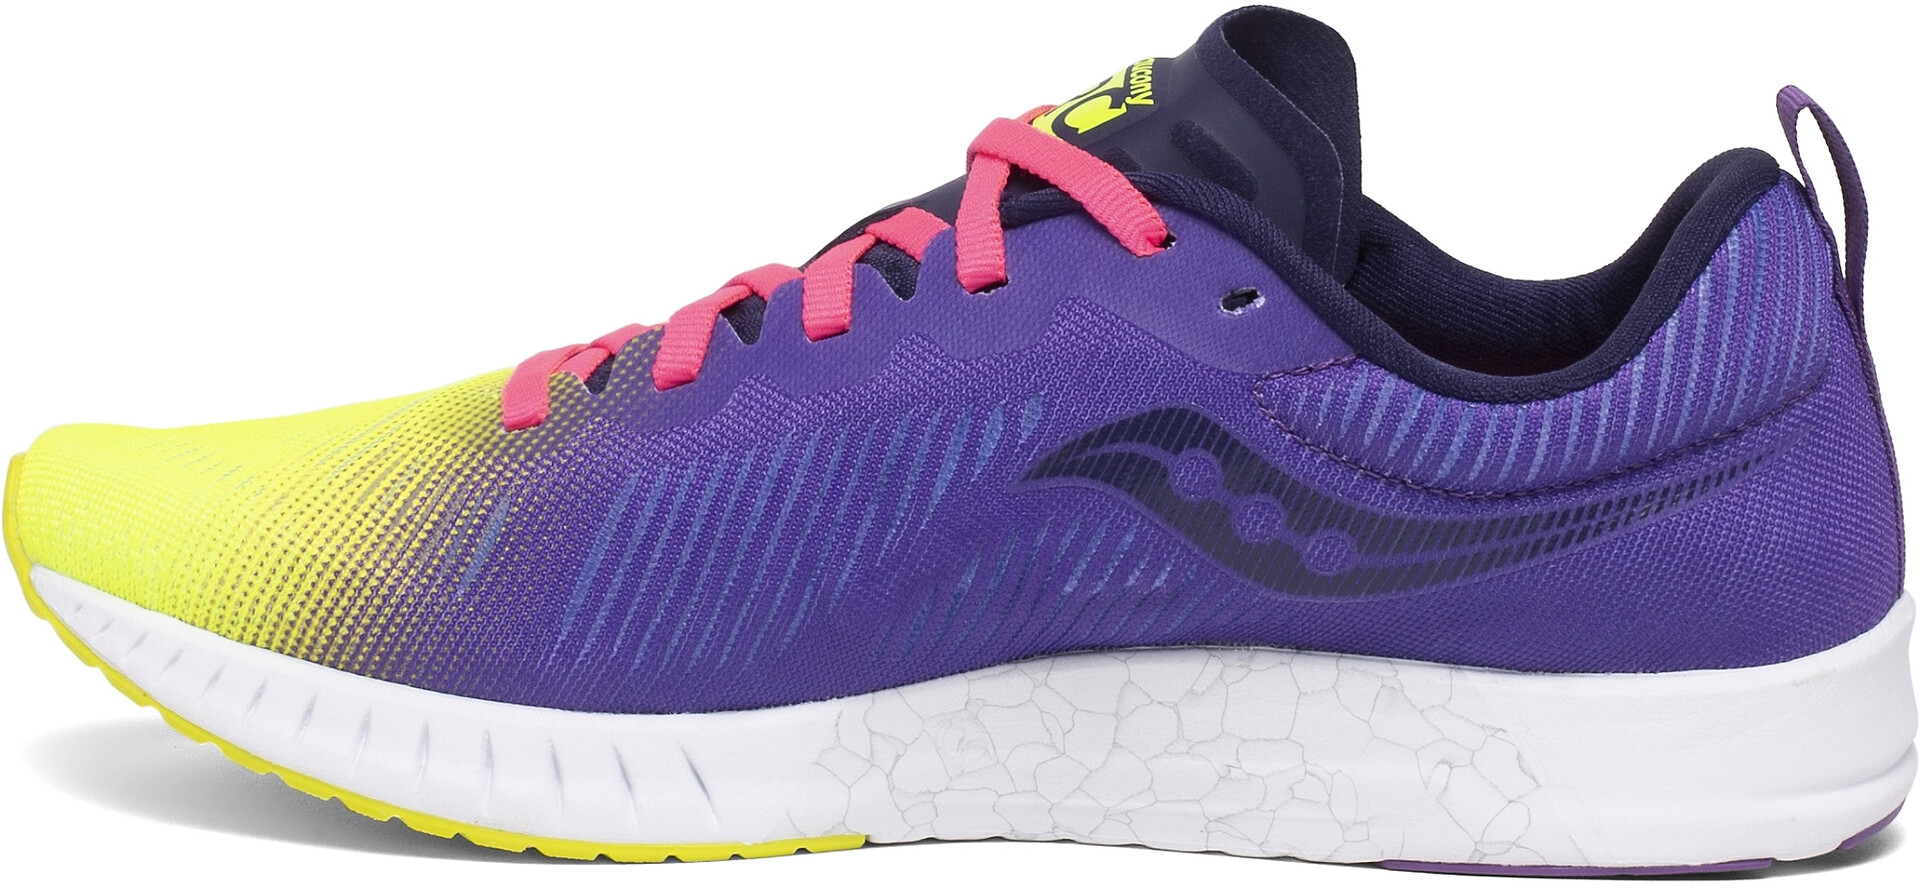 saucony fastwitch 7 femme rose